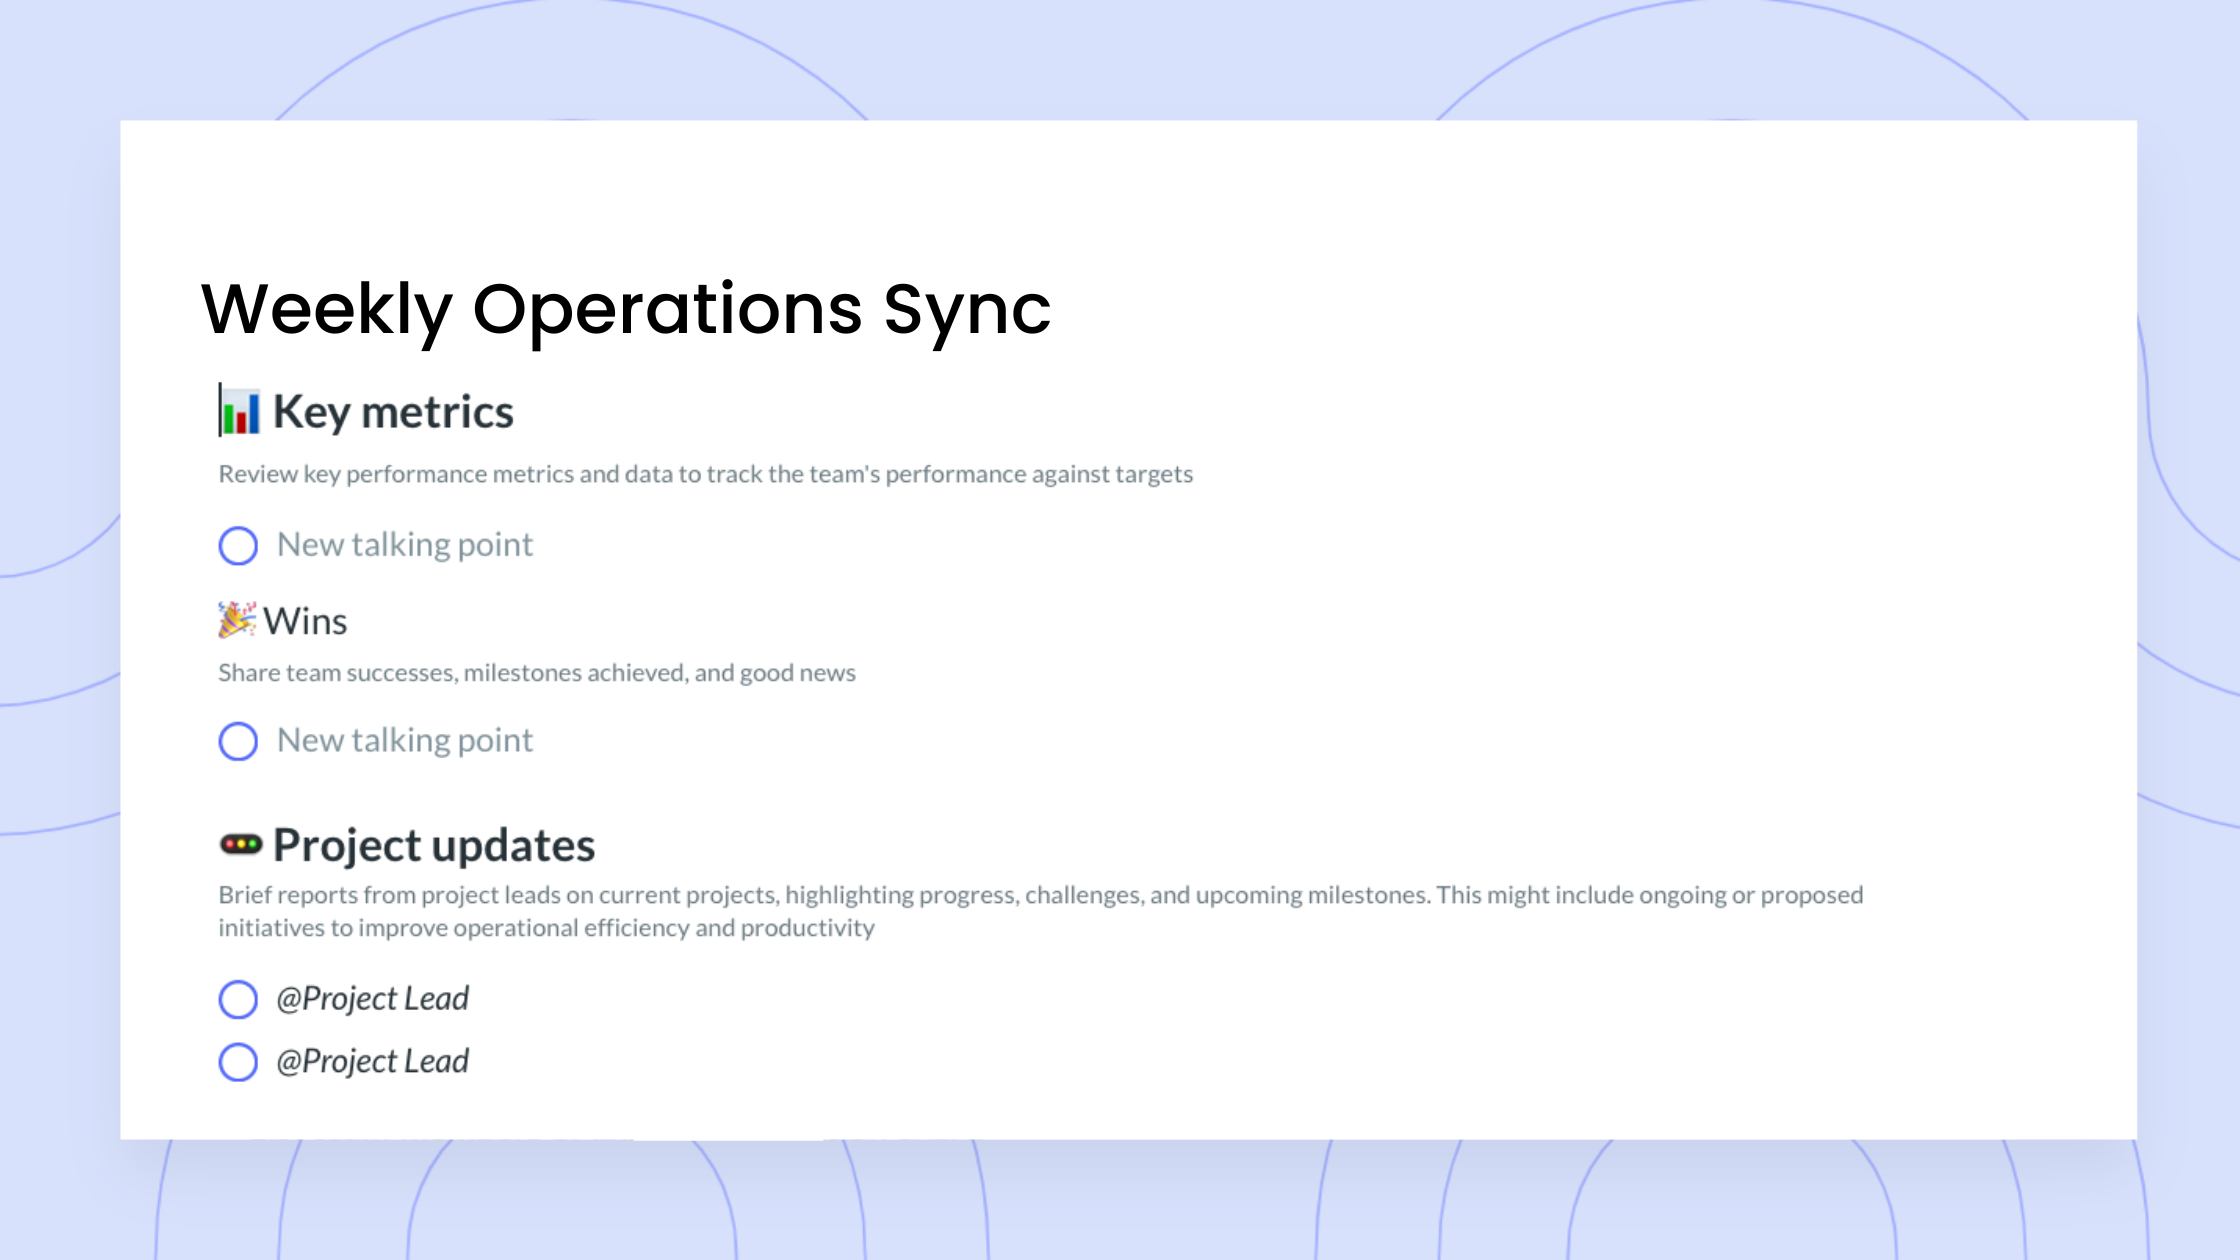 Weekly Operations Sync